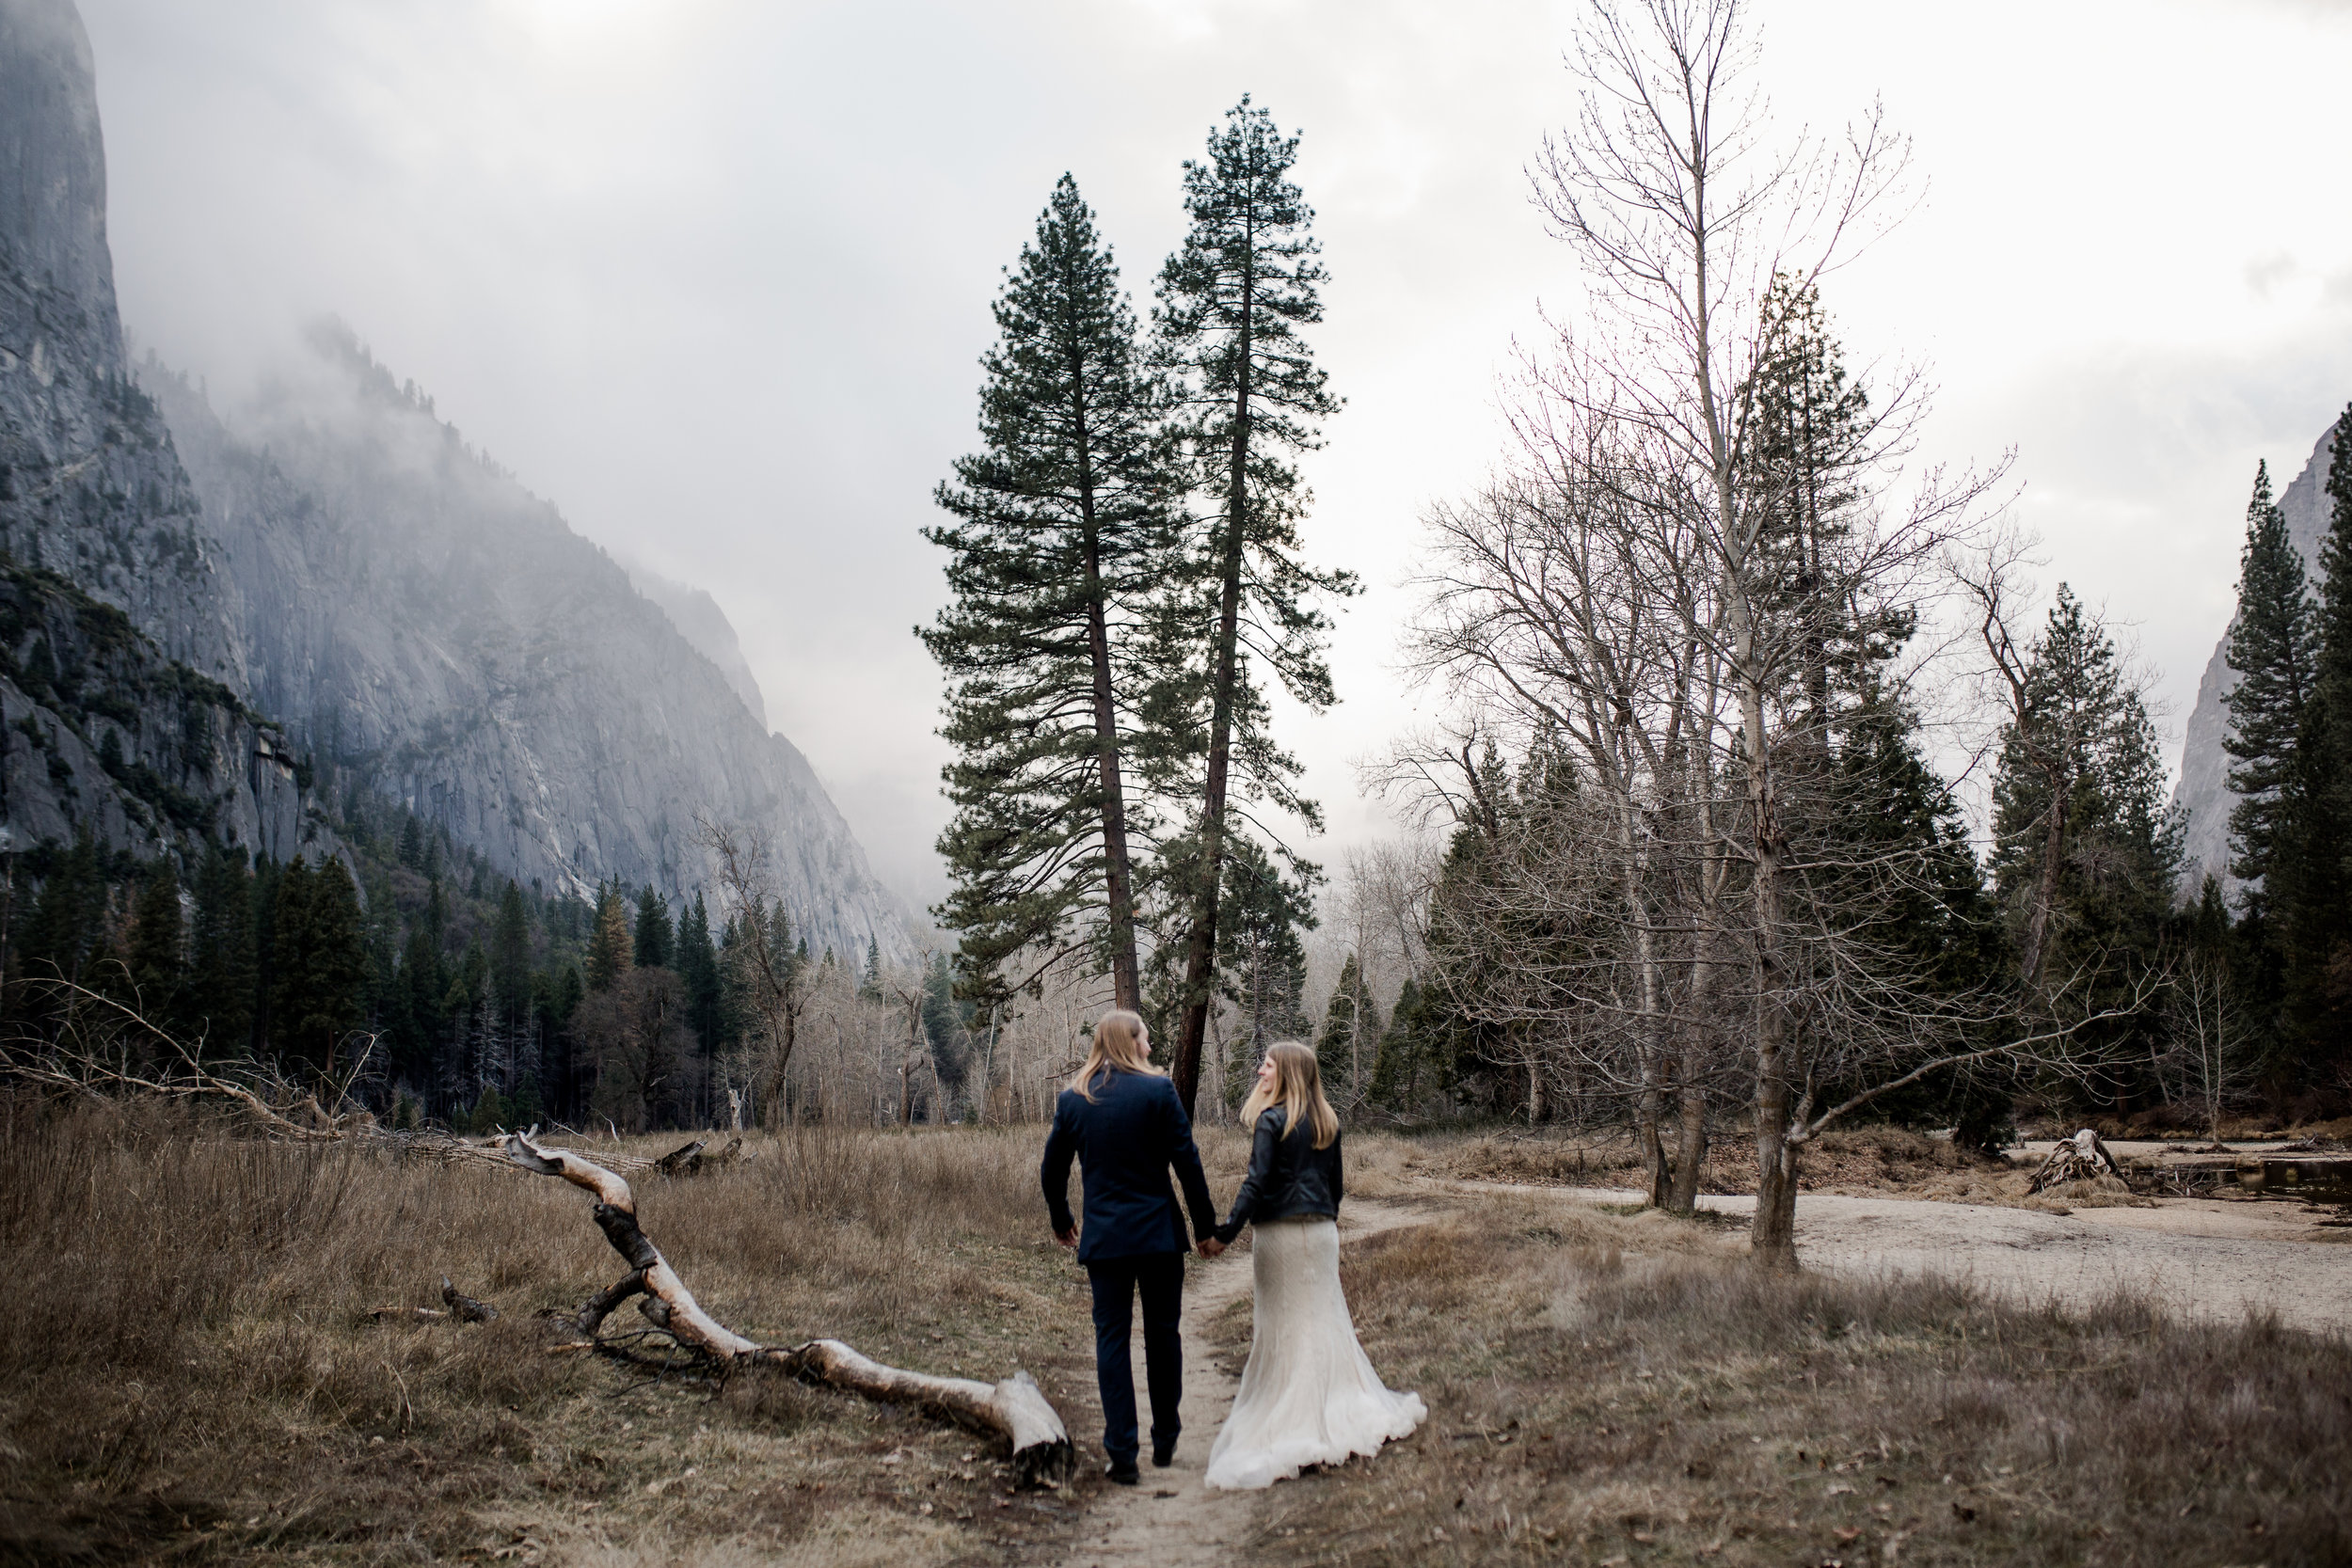 nicole-daacke-photography-yousemite-national-park-elopement-photographer-winter-cloud-moody-elope-inspiration-yosemite-valley-tunnel-view-winter-cloud-fog-weather-wedding-photos-55.jpg